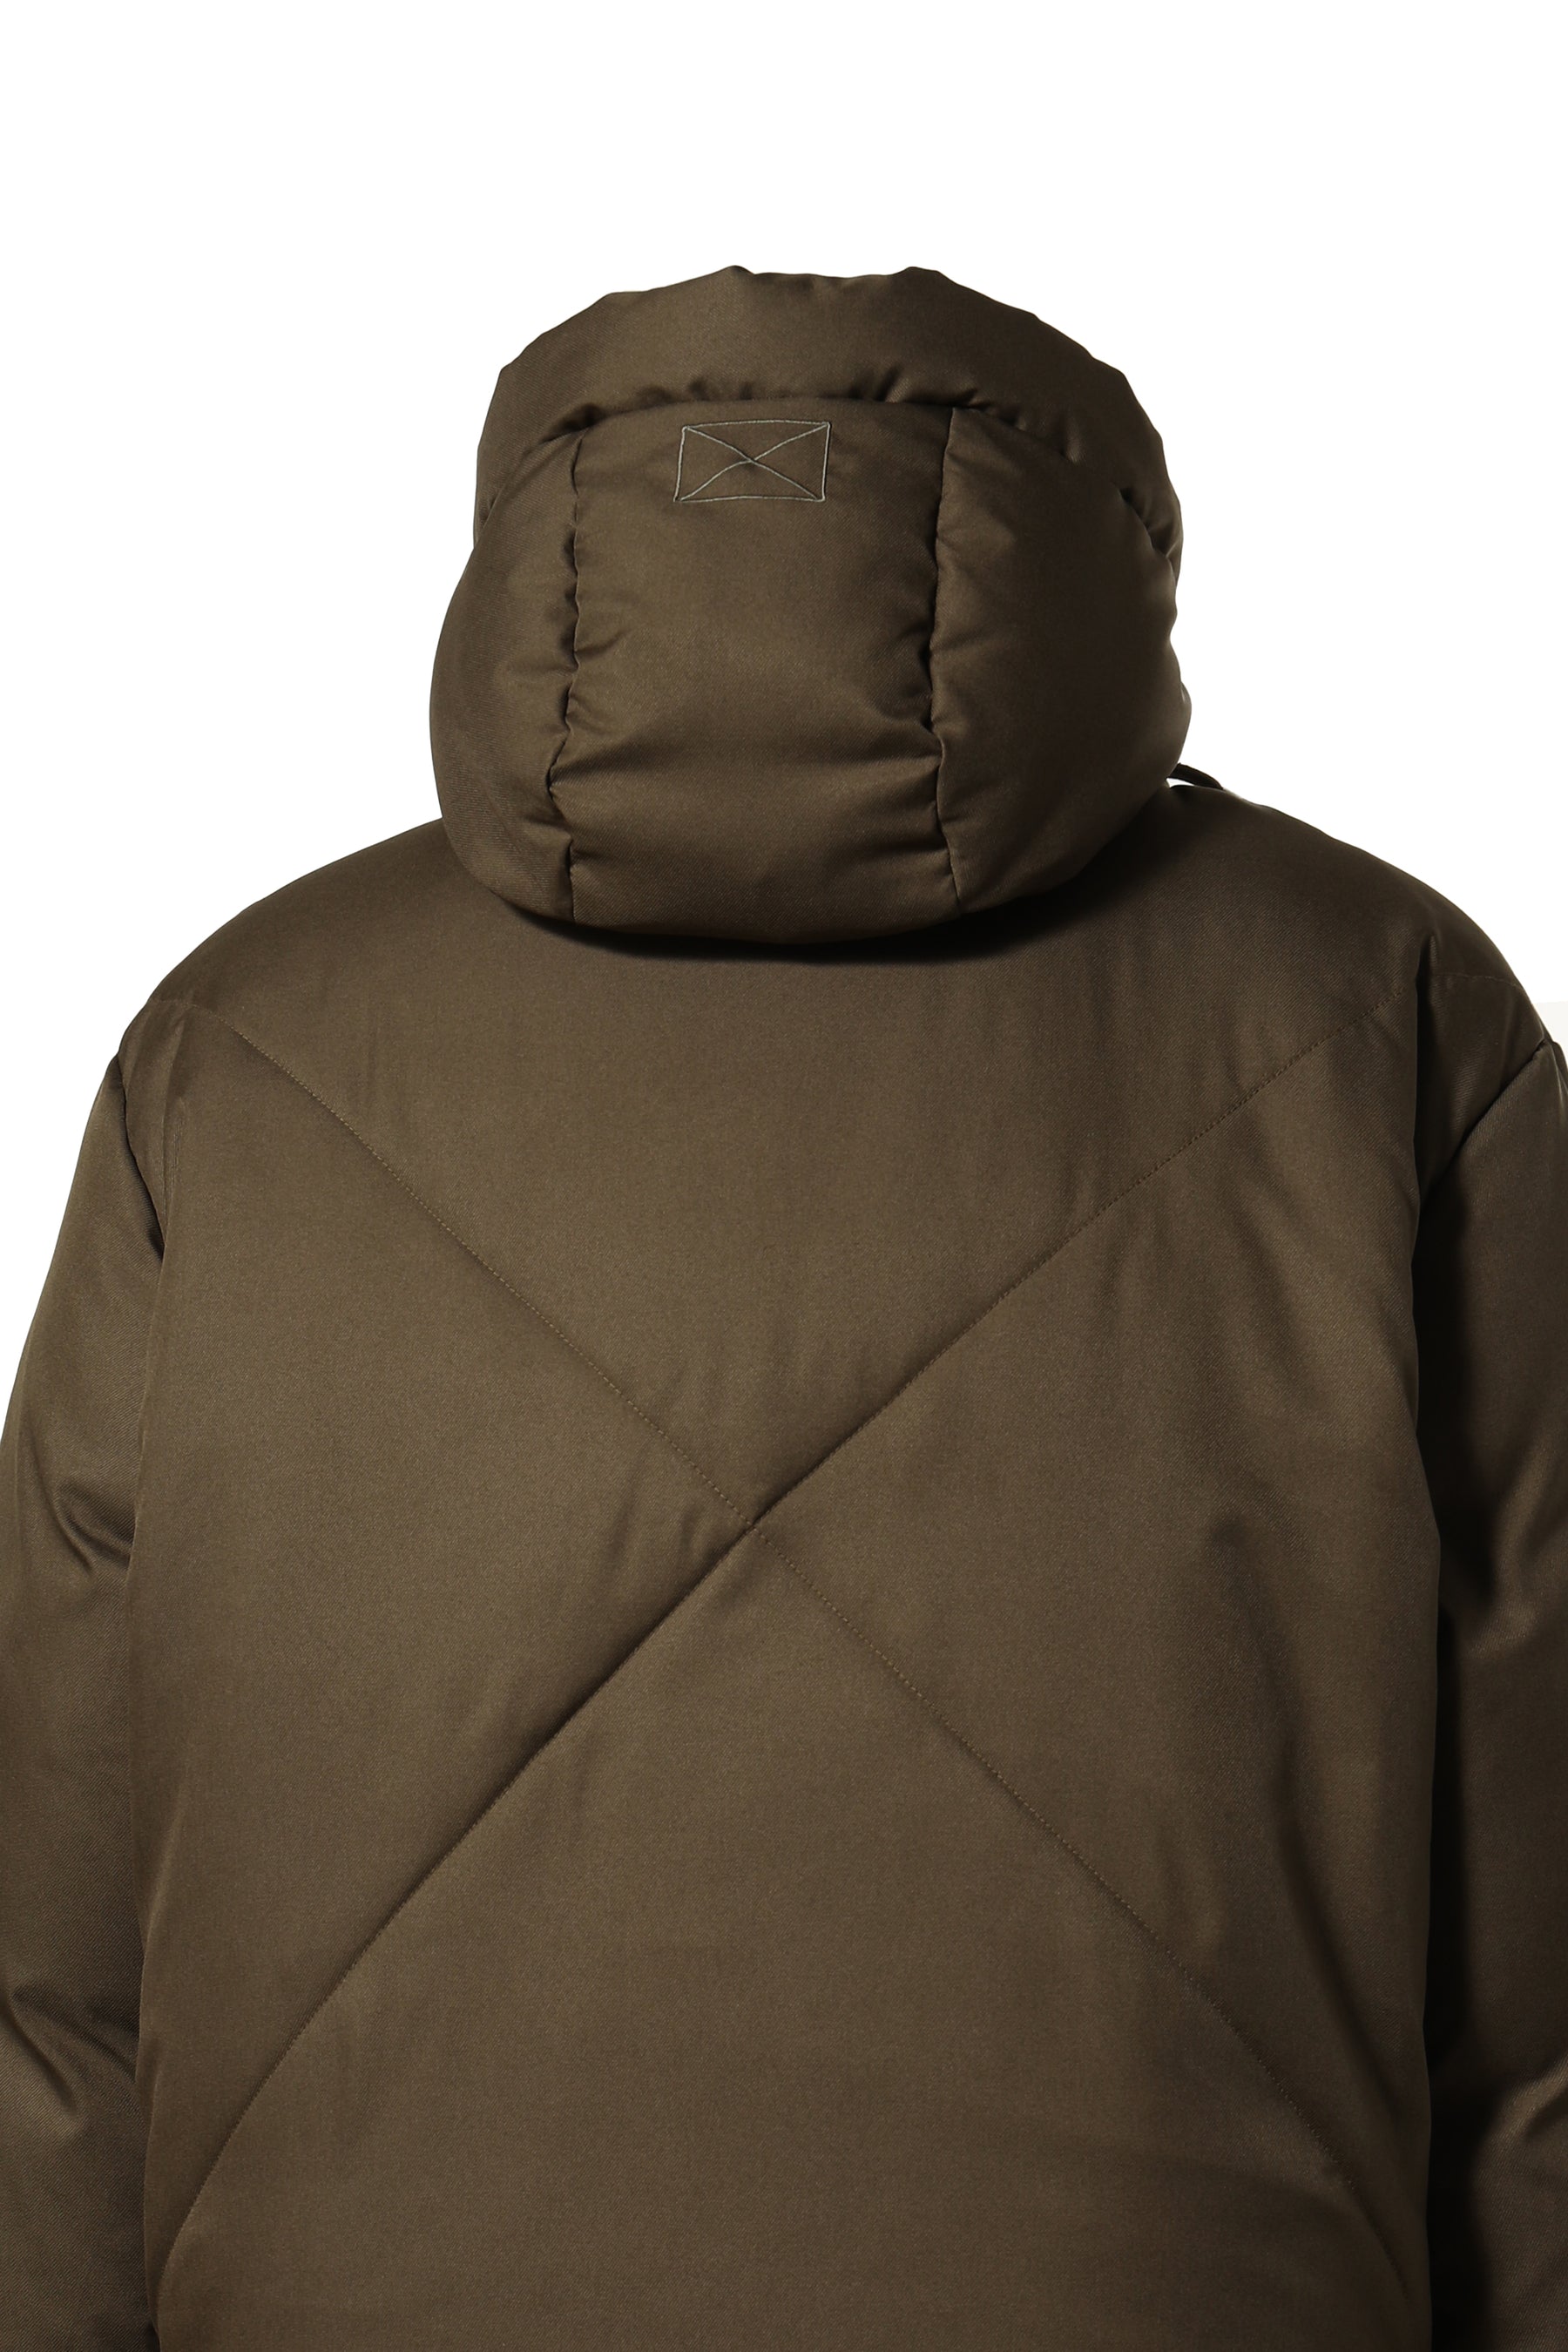 MLVINCE メルヴィンス FW23 LIMONTA DOWN JACKET / TAN -NUBIAN